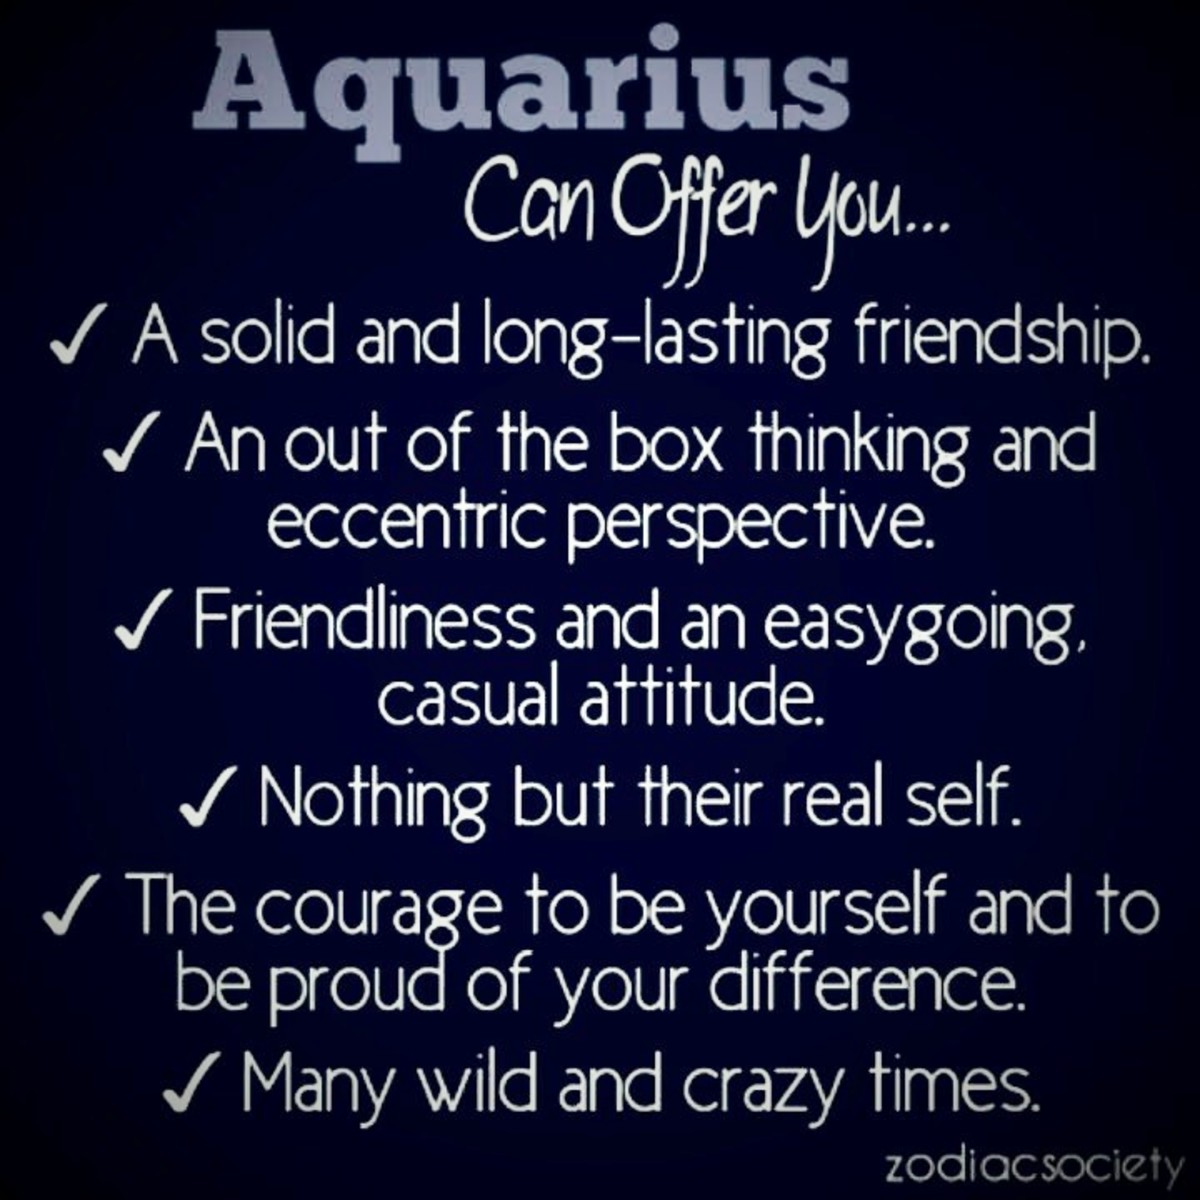 Loving And Being In Relationships With The Water-bearer, Aka An Aquarius Wo...